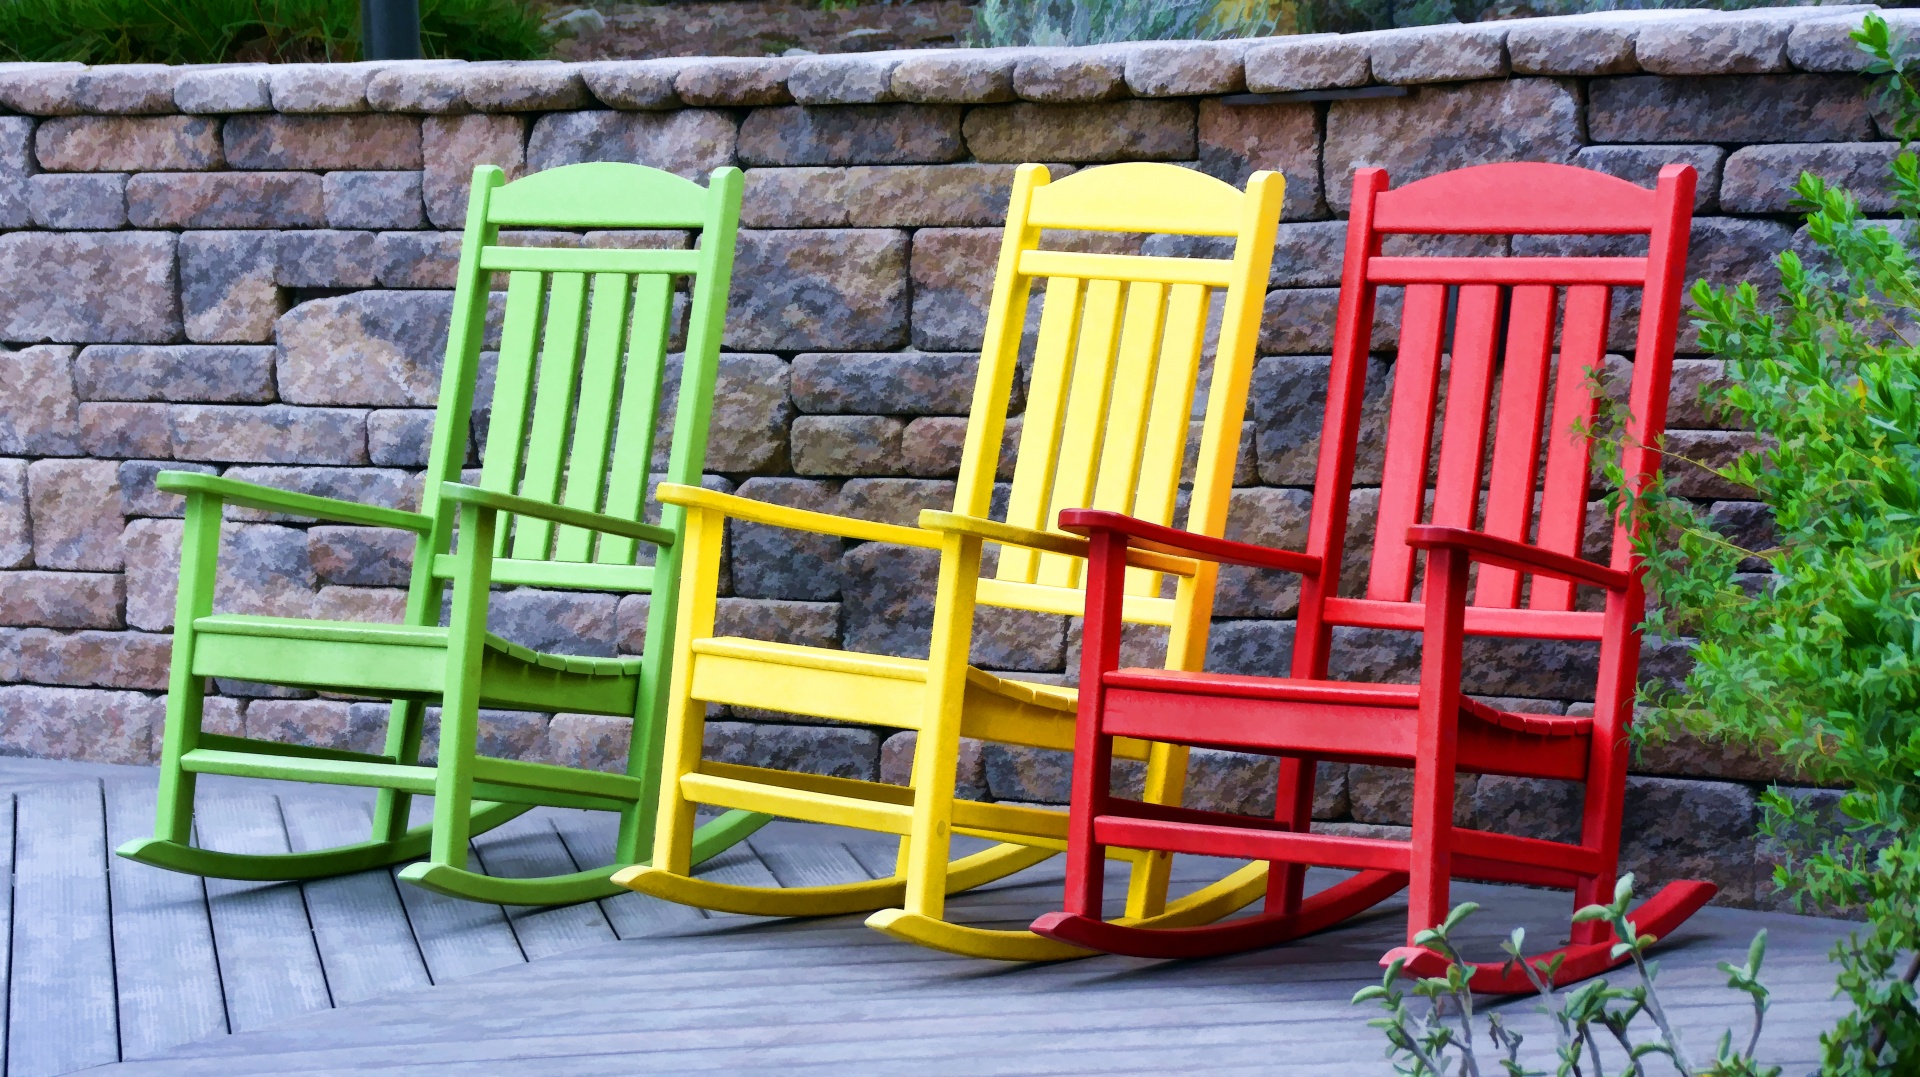 Colourful outdoor rocking chairs in green, yellow and red colours